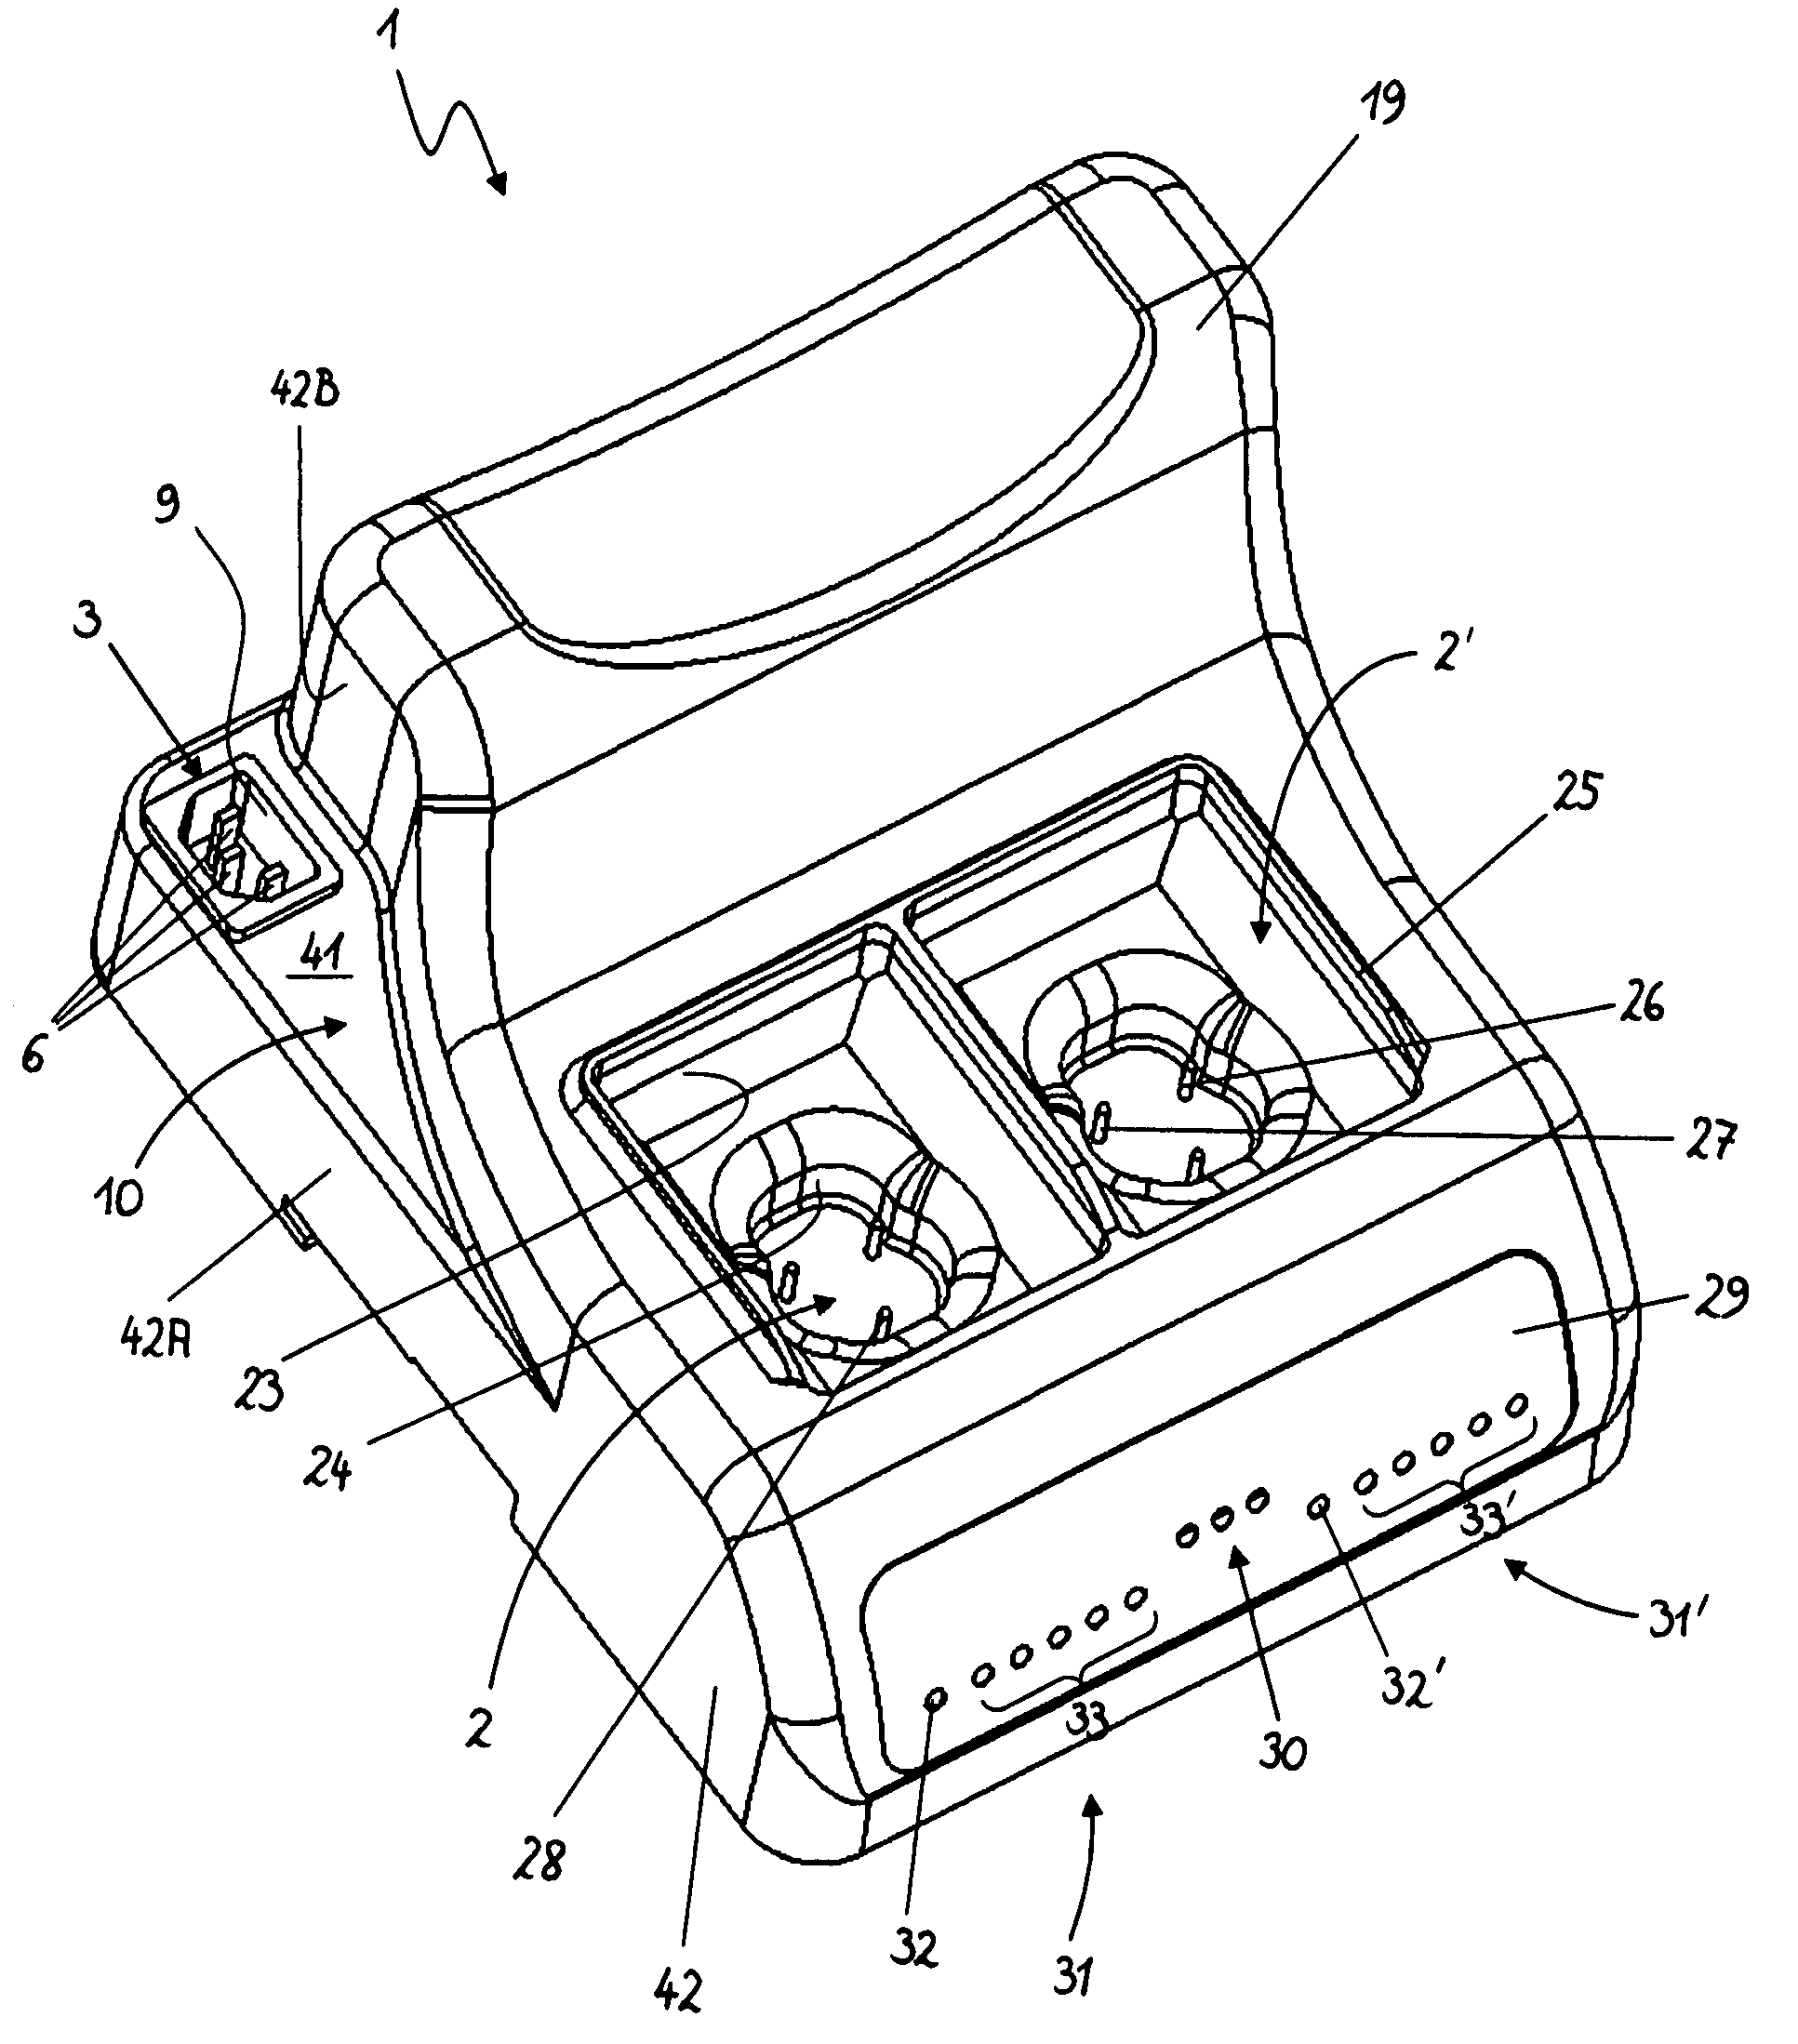 Device for charging batteries